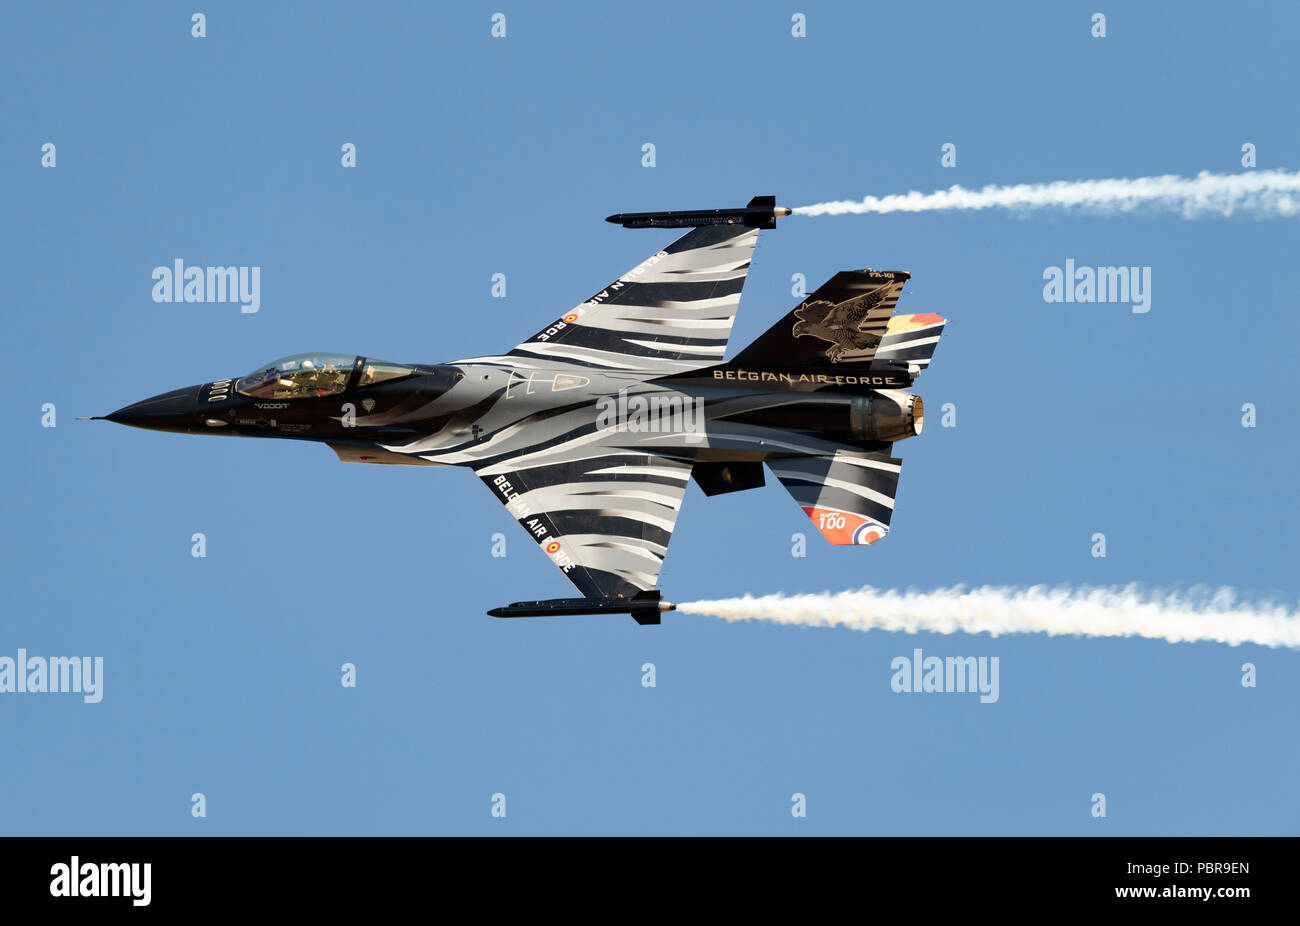 F-16A Fighting Falcon, 'Vador' The Dark Falcon, 2 Wing, Belgian Air Component, Stock Photo